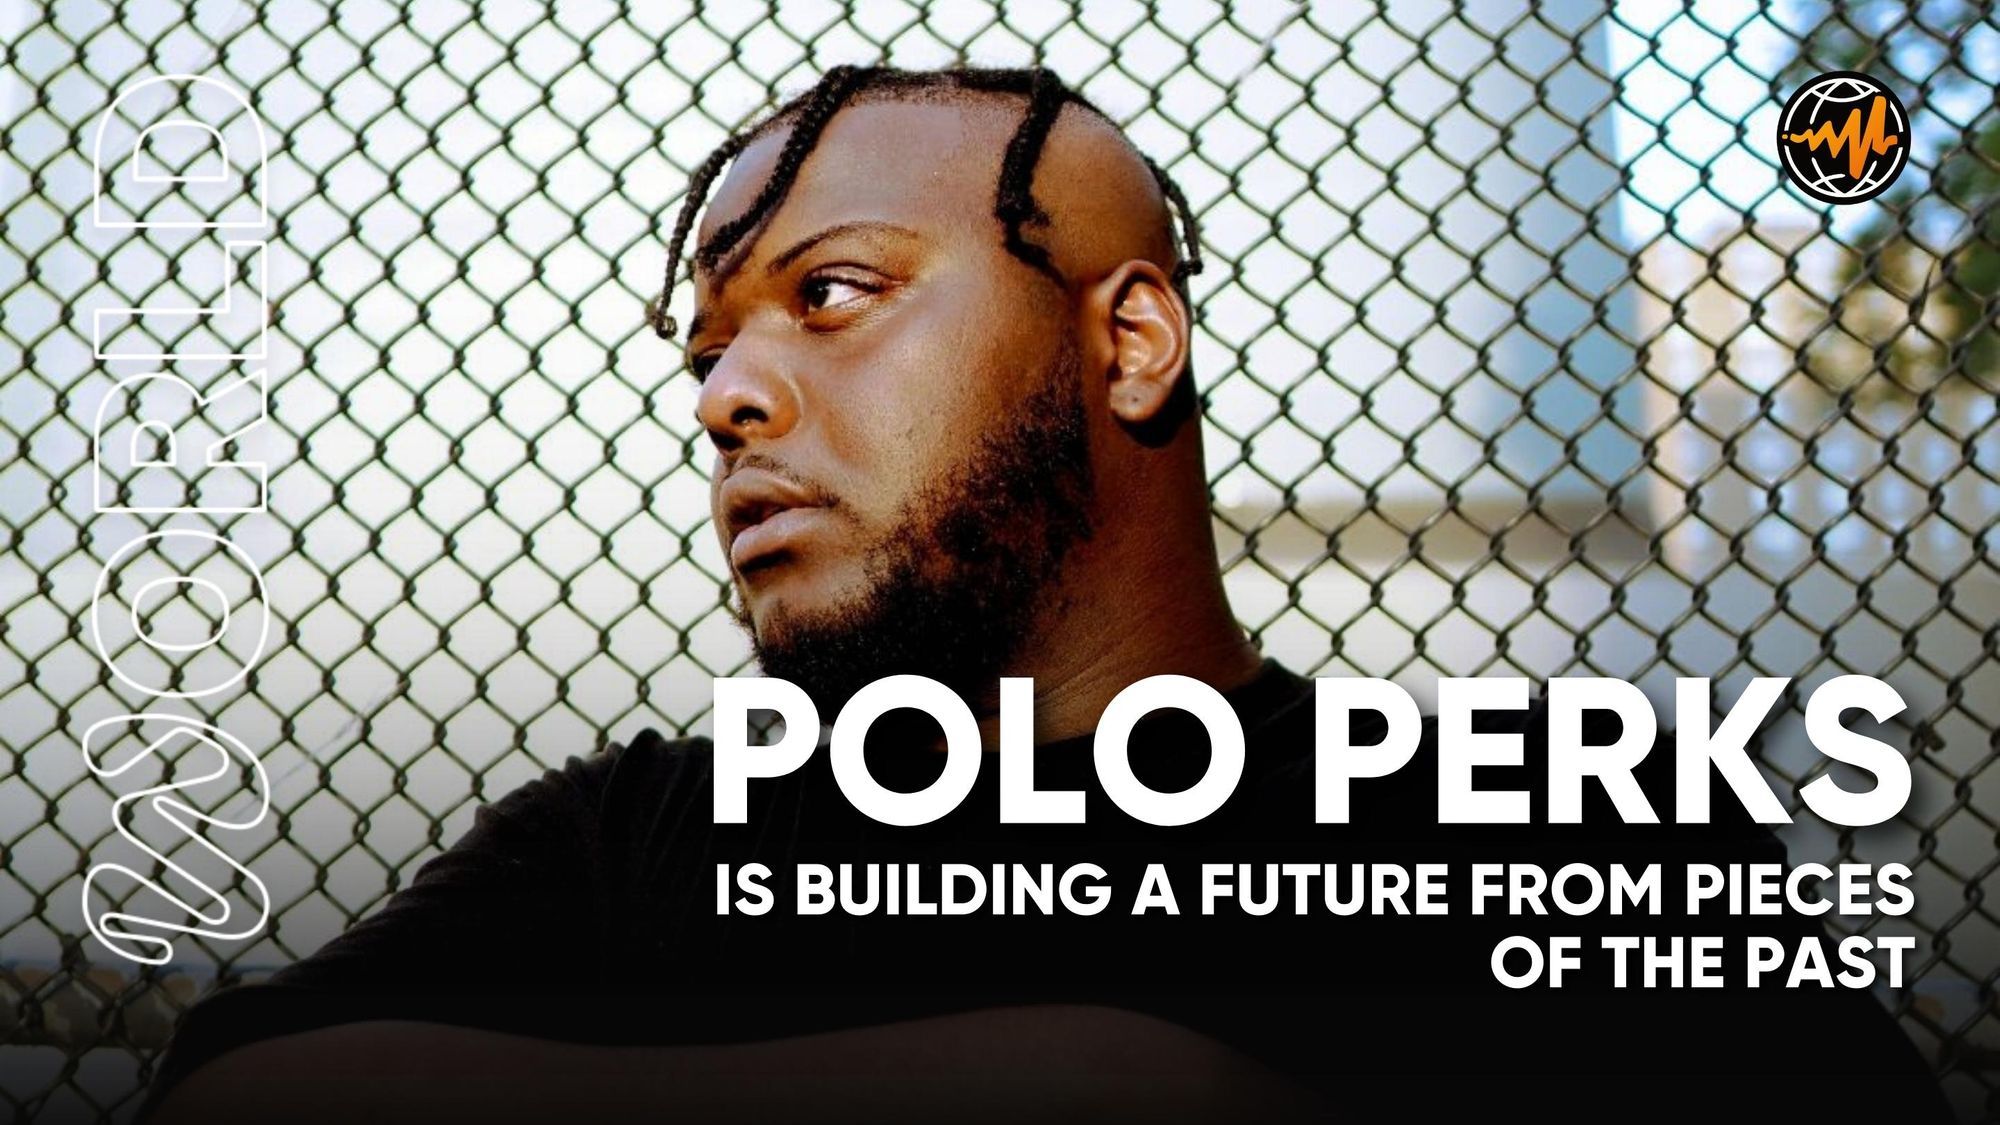 Polo Perks Is Building a Future From Pieces of the Past